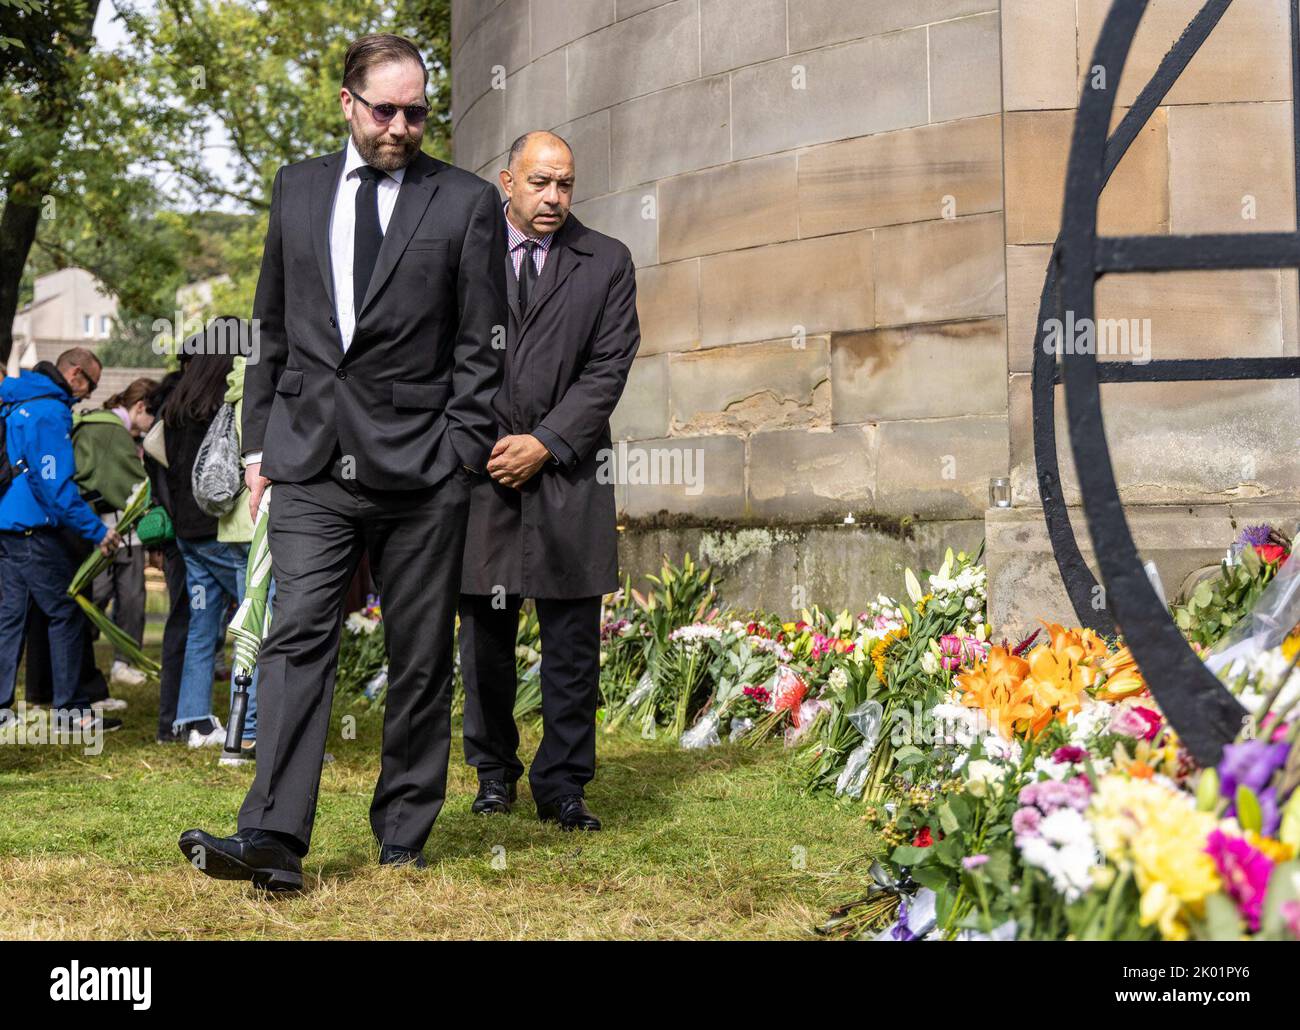 Edinburgh, United Kingdom. 09 September, 2022 Pictured: A mourner at the Palace of Holyroodhouse in Edinburgh. Credit: Rich Dyson/Alamy Live News Stock Photo